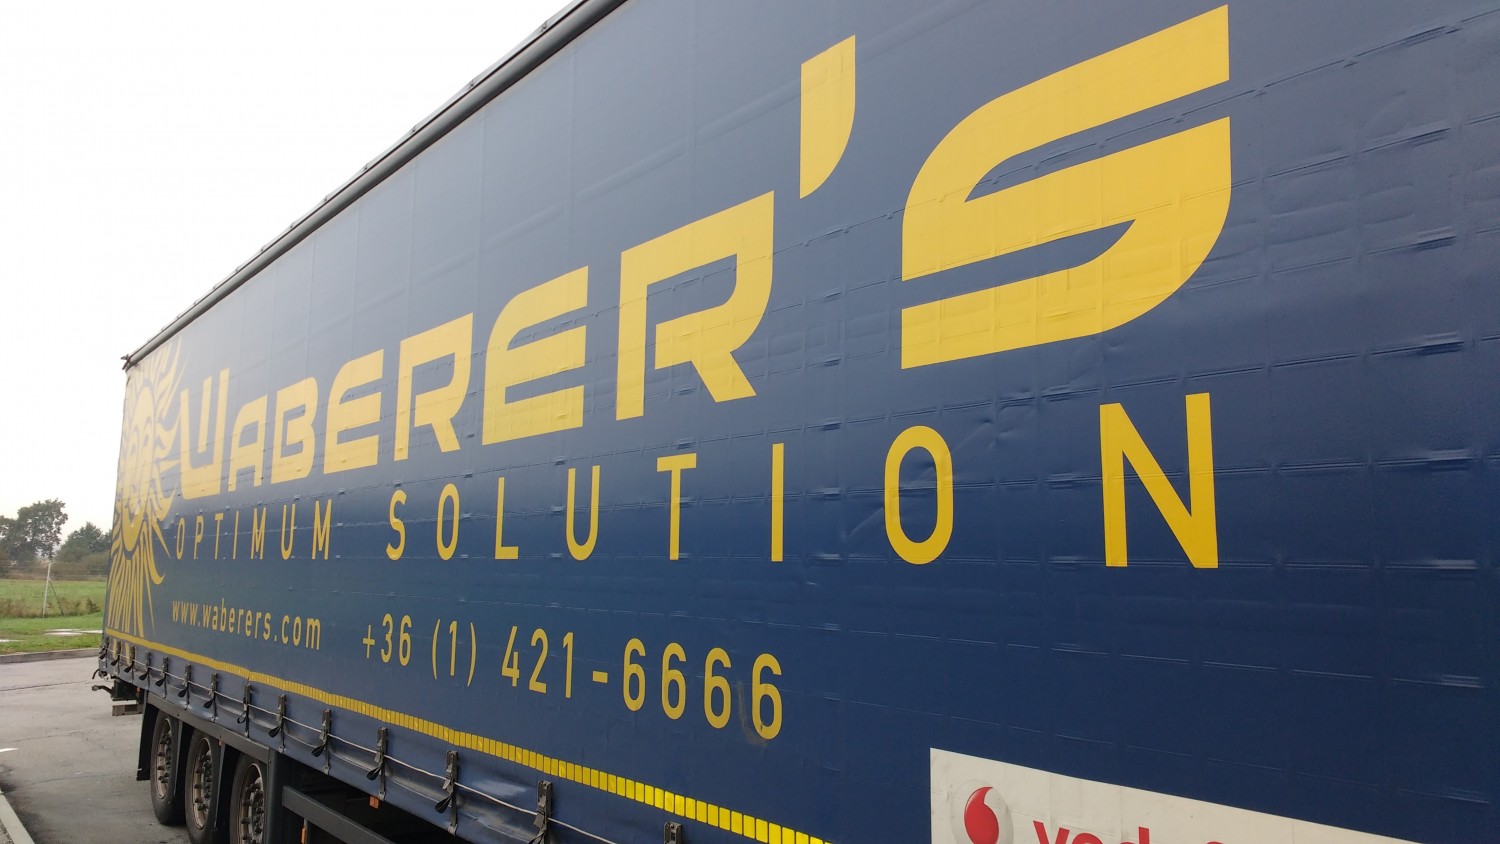 Waberer's Solution truck to Budapest